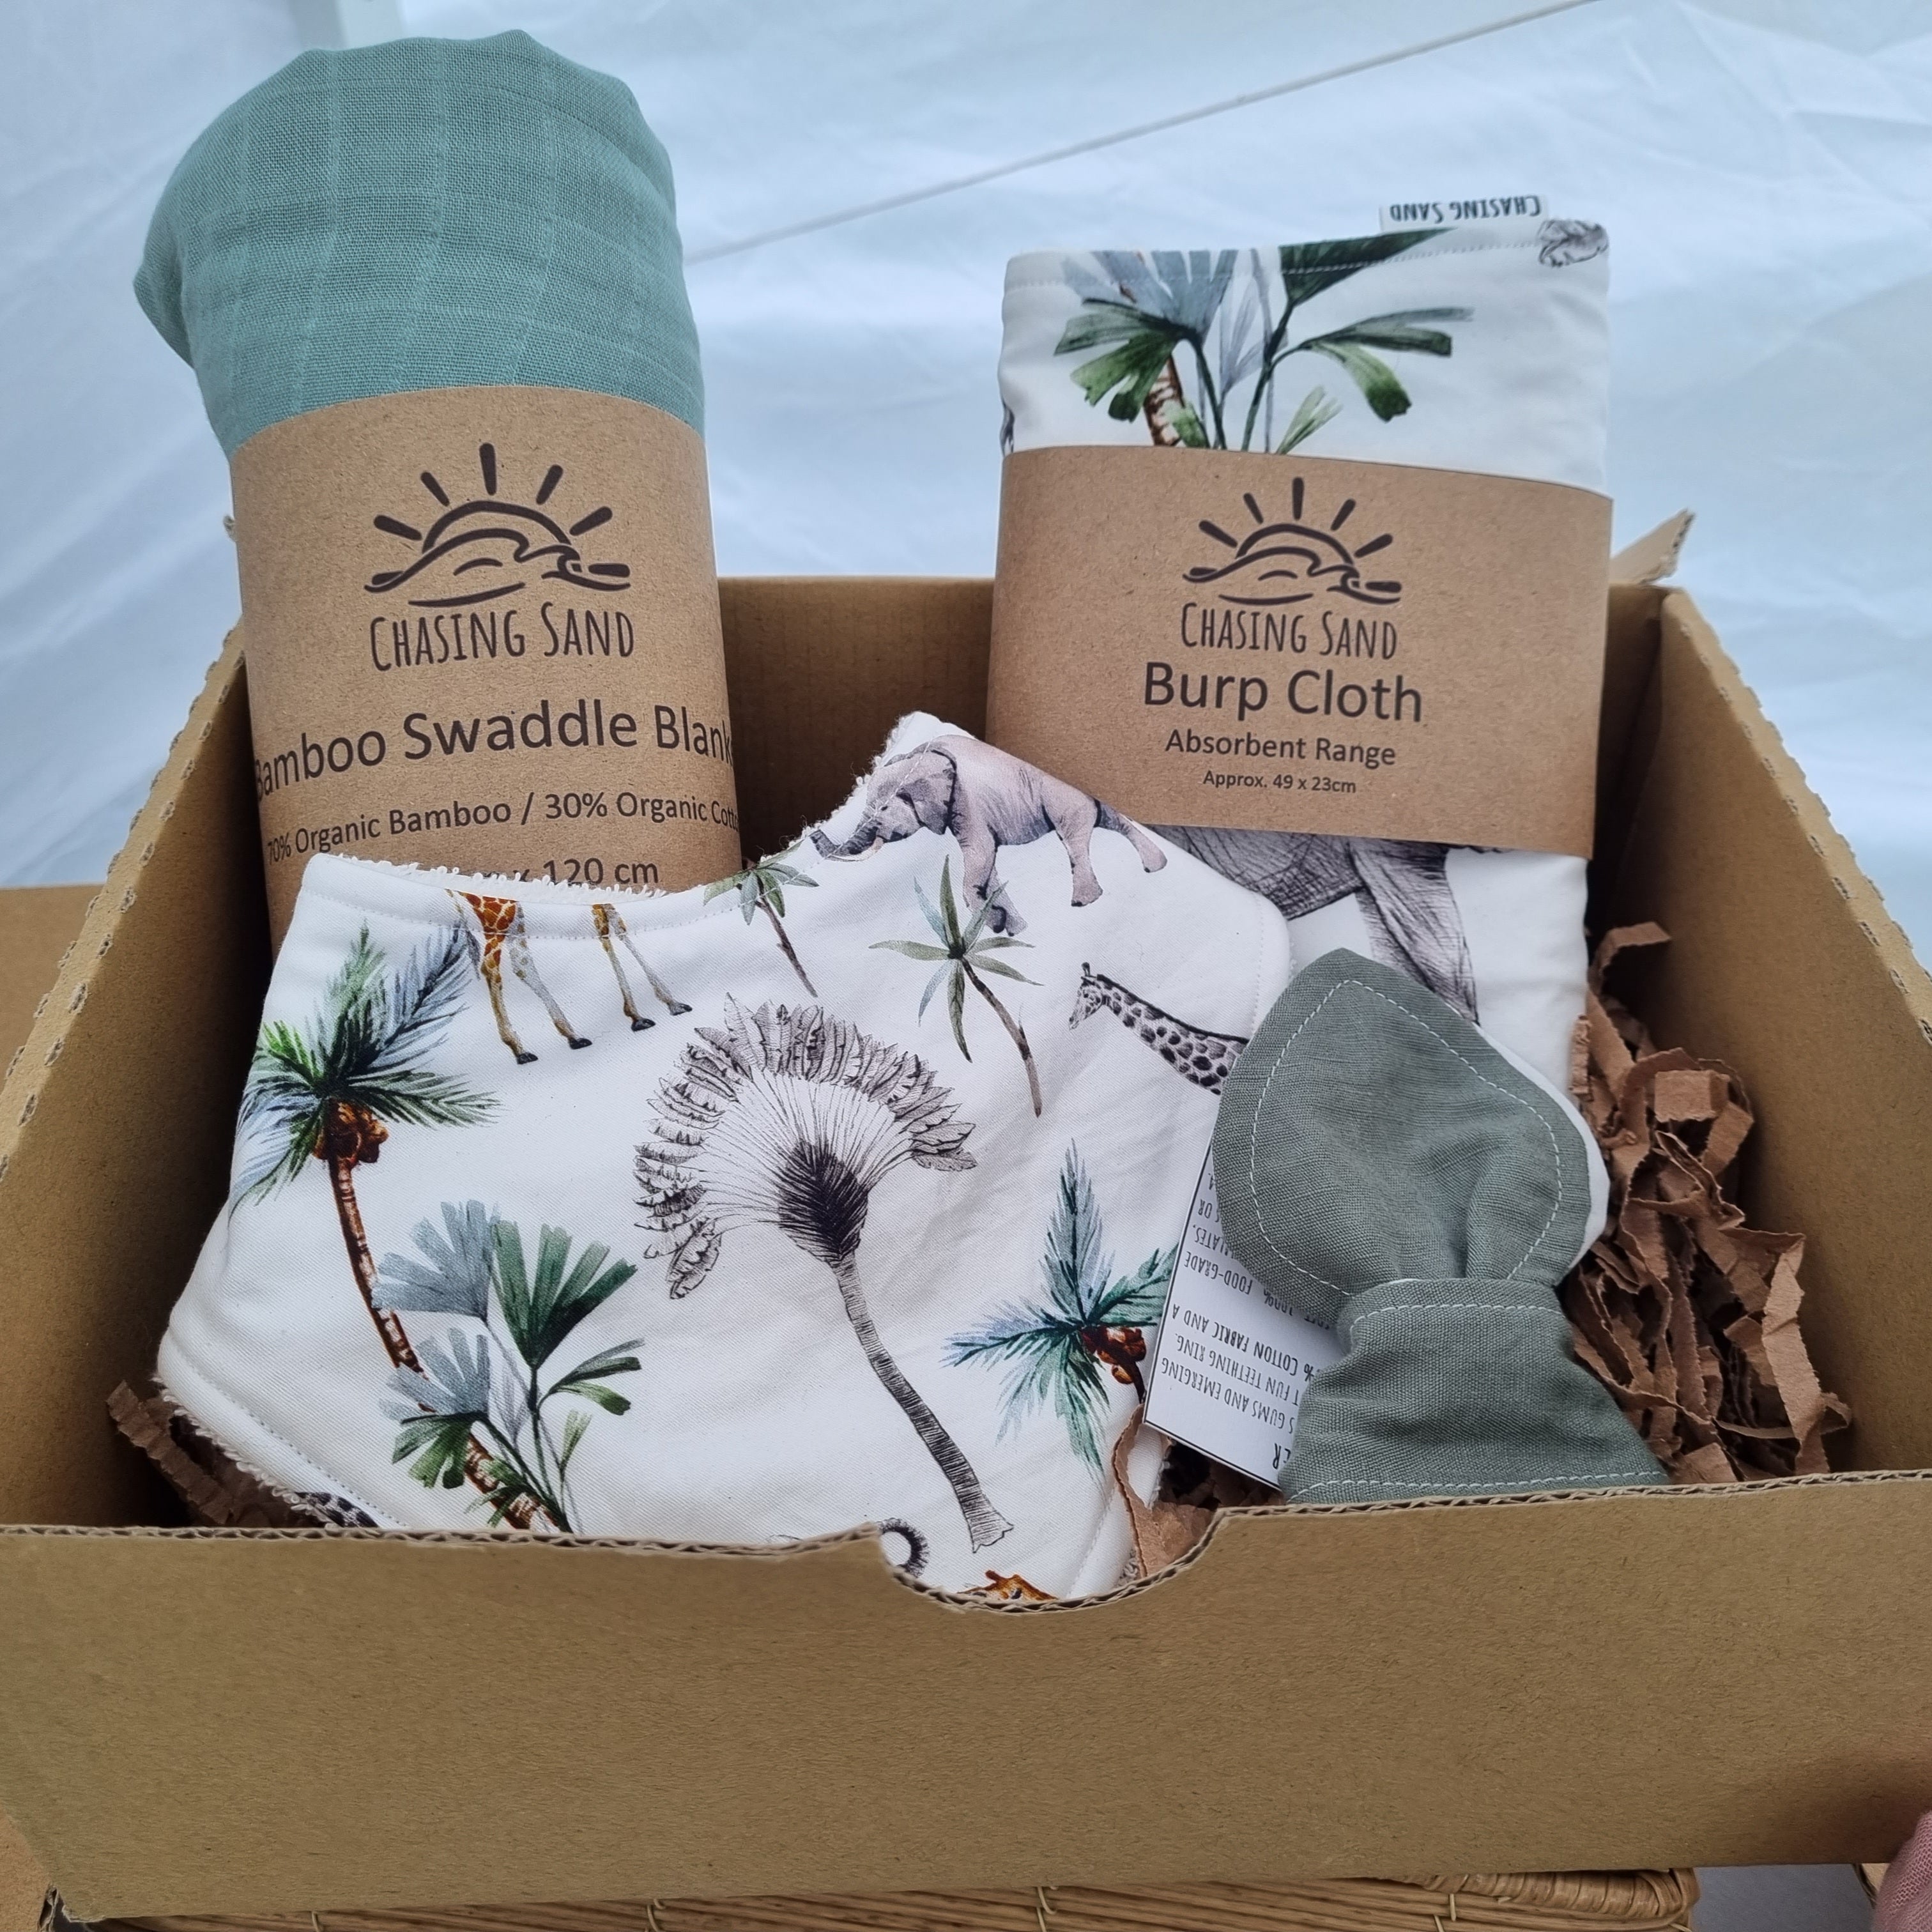 Chasing Sand Gift Box, containing 1x Swaddle in a green colour, 1x Burp Cloth in Safari, 1x Dribble Bib in Safari and 1x Teether in a dark green colour.